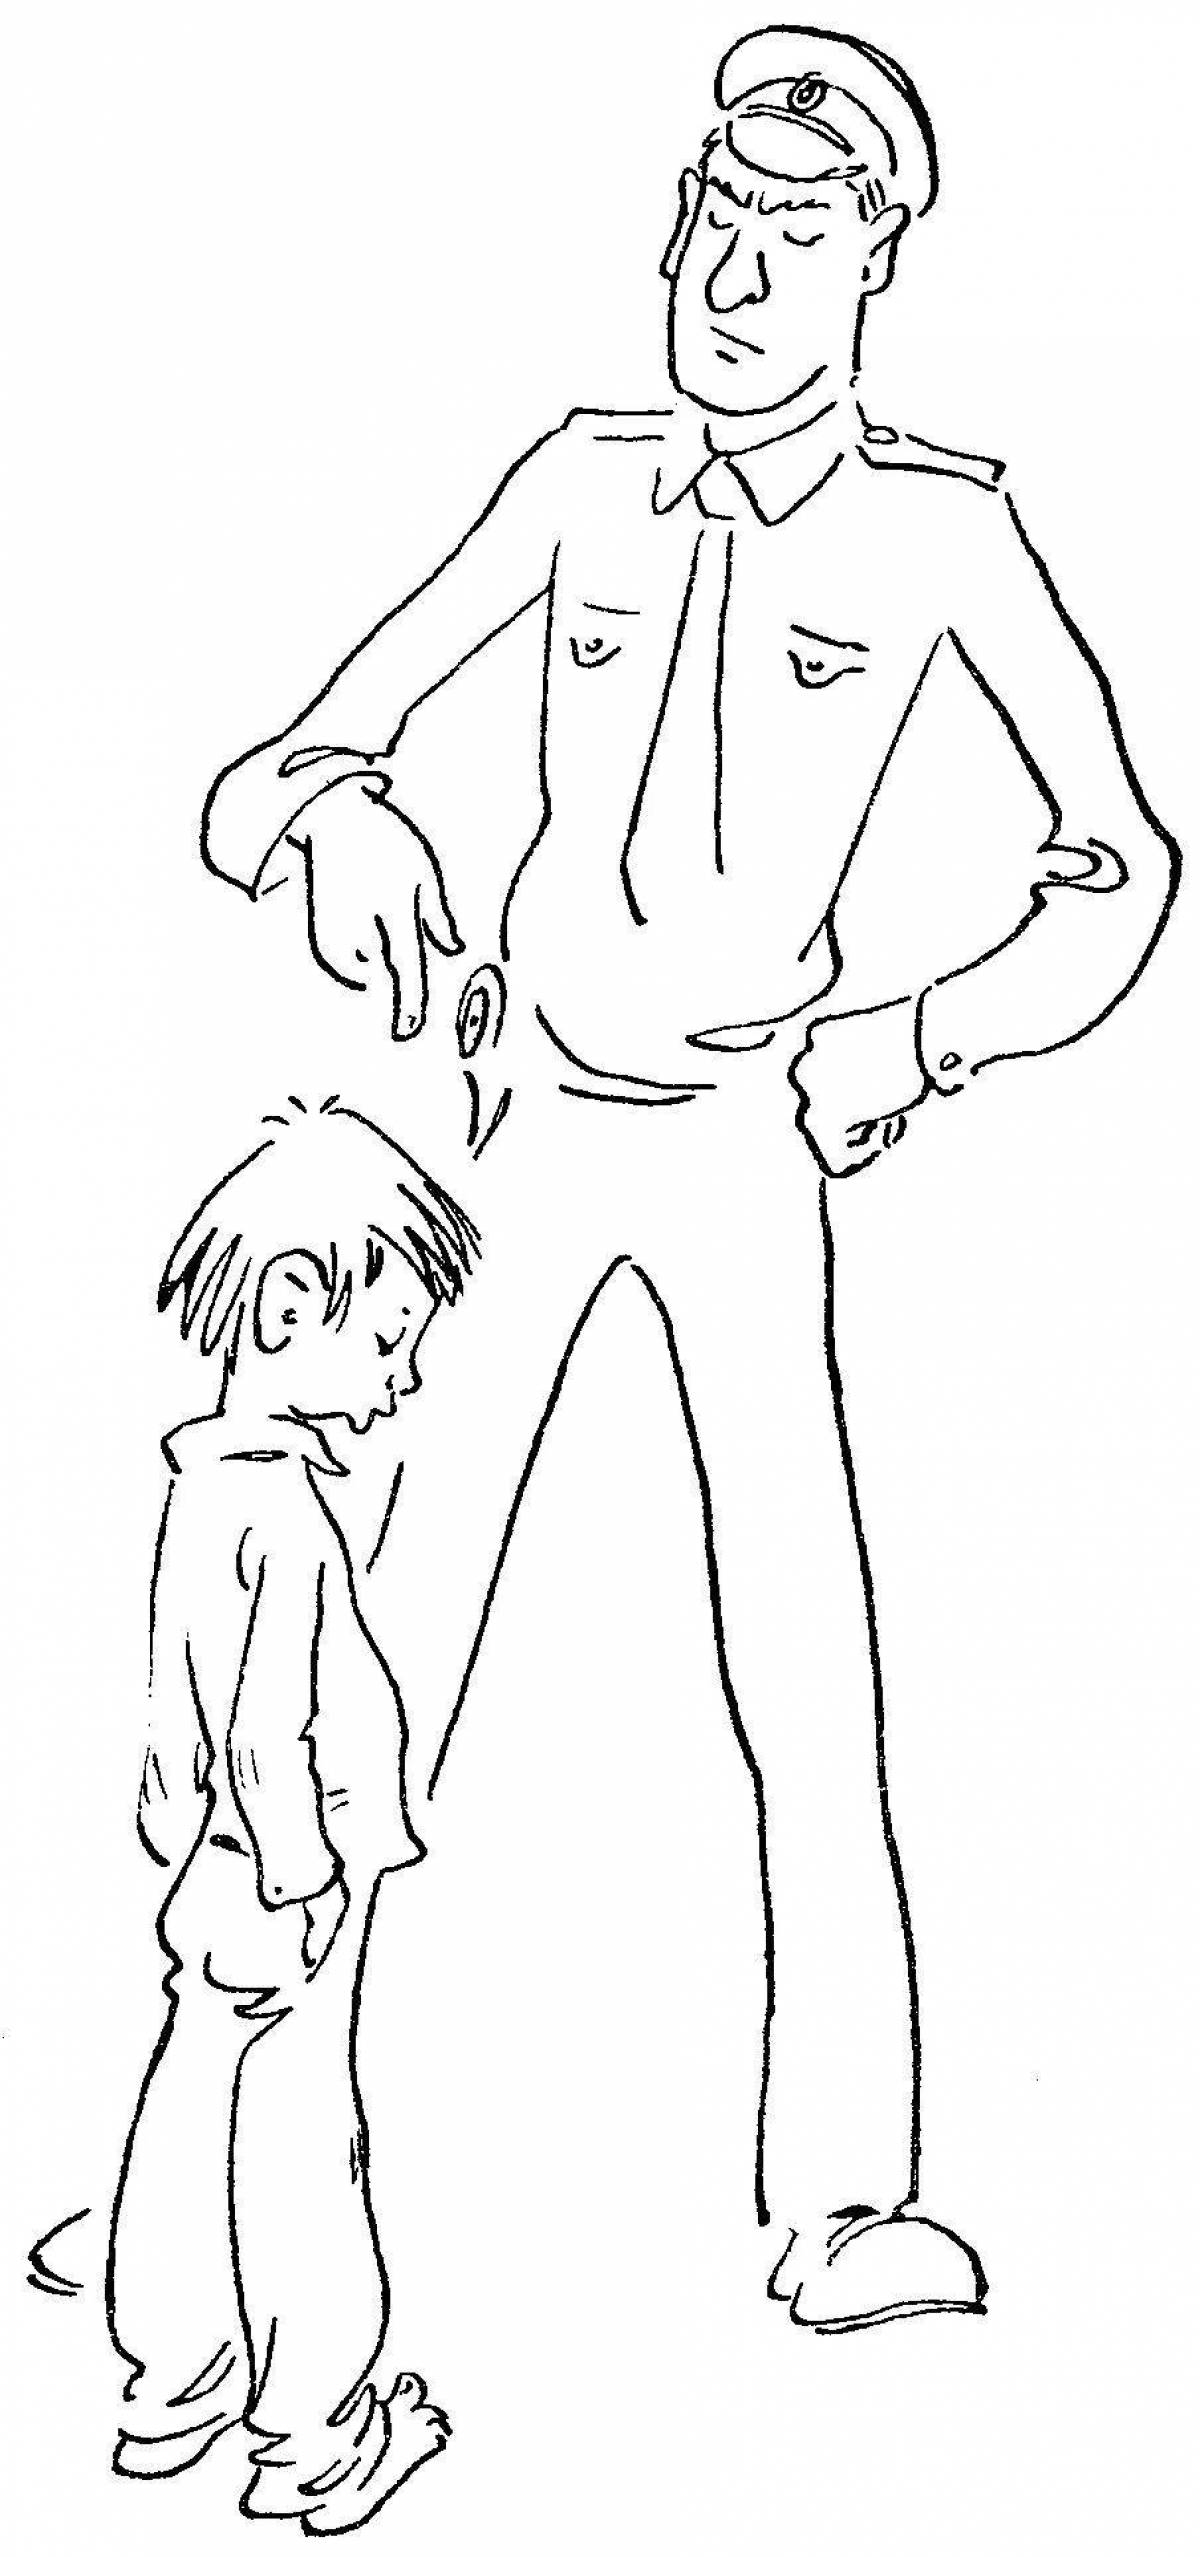 Coloring page charming uncle tapa